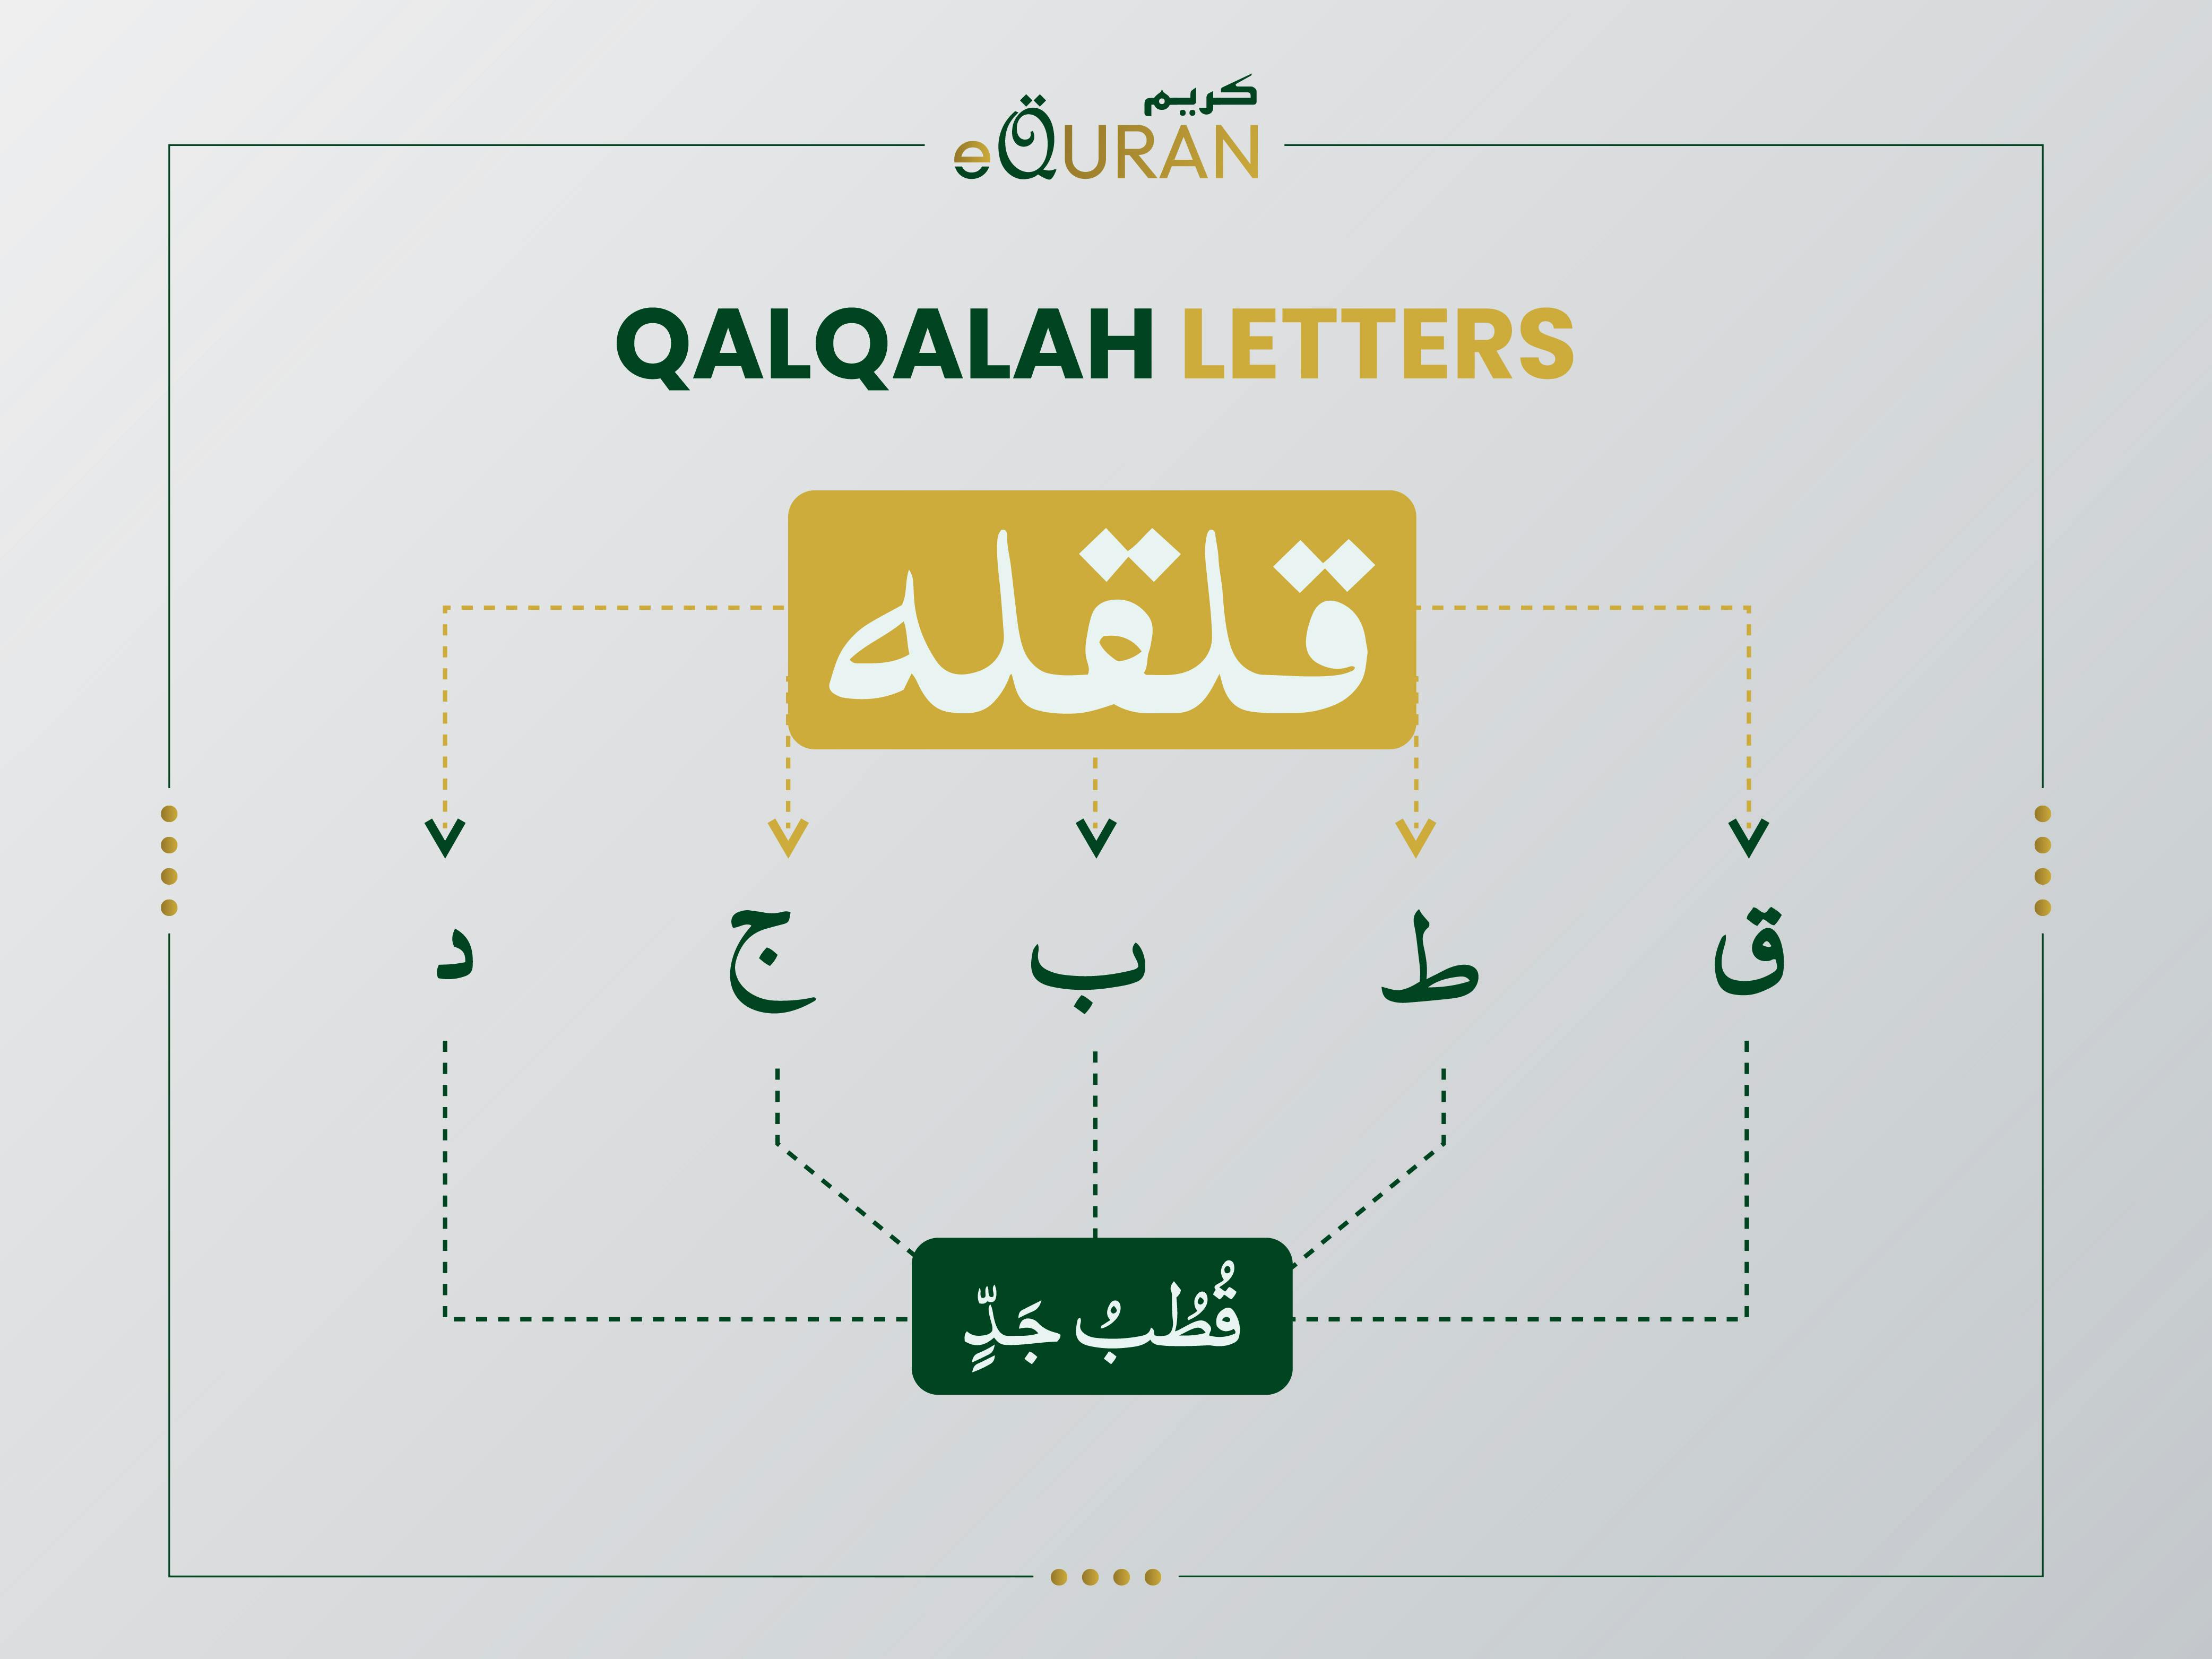 QalQalah letters and  Rules Arabic letters in quran


